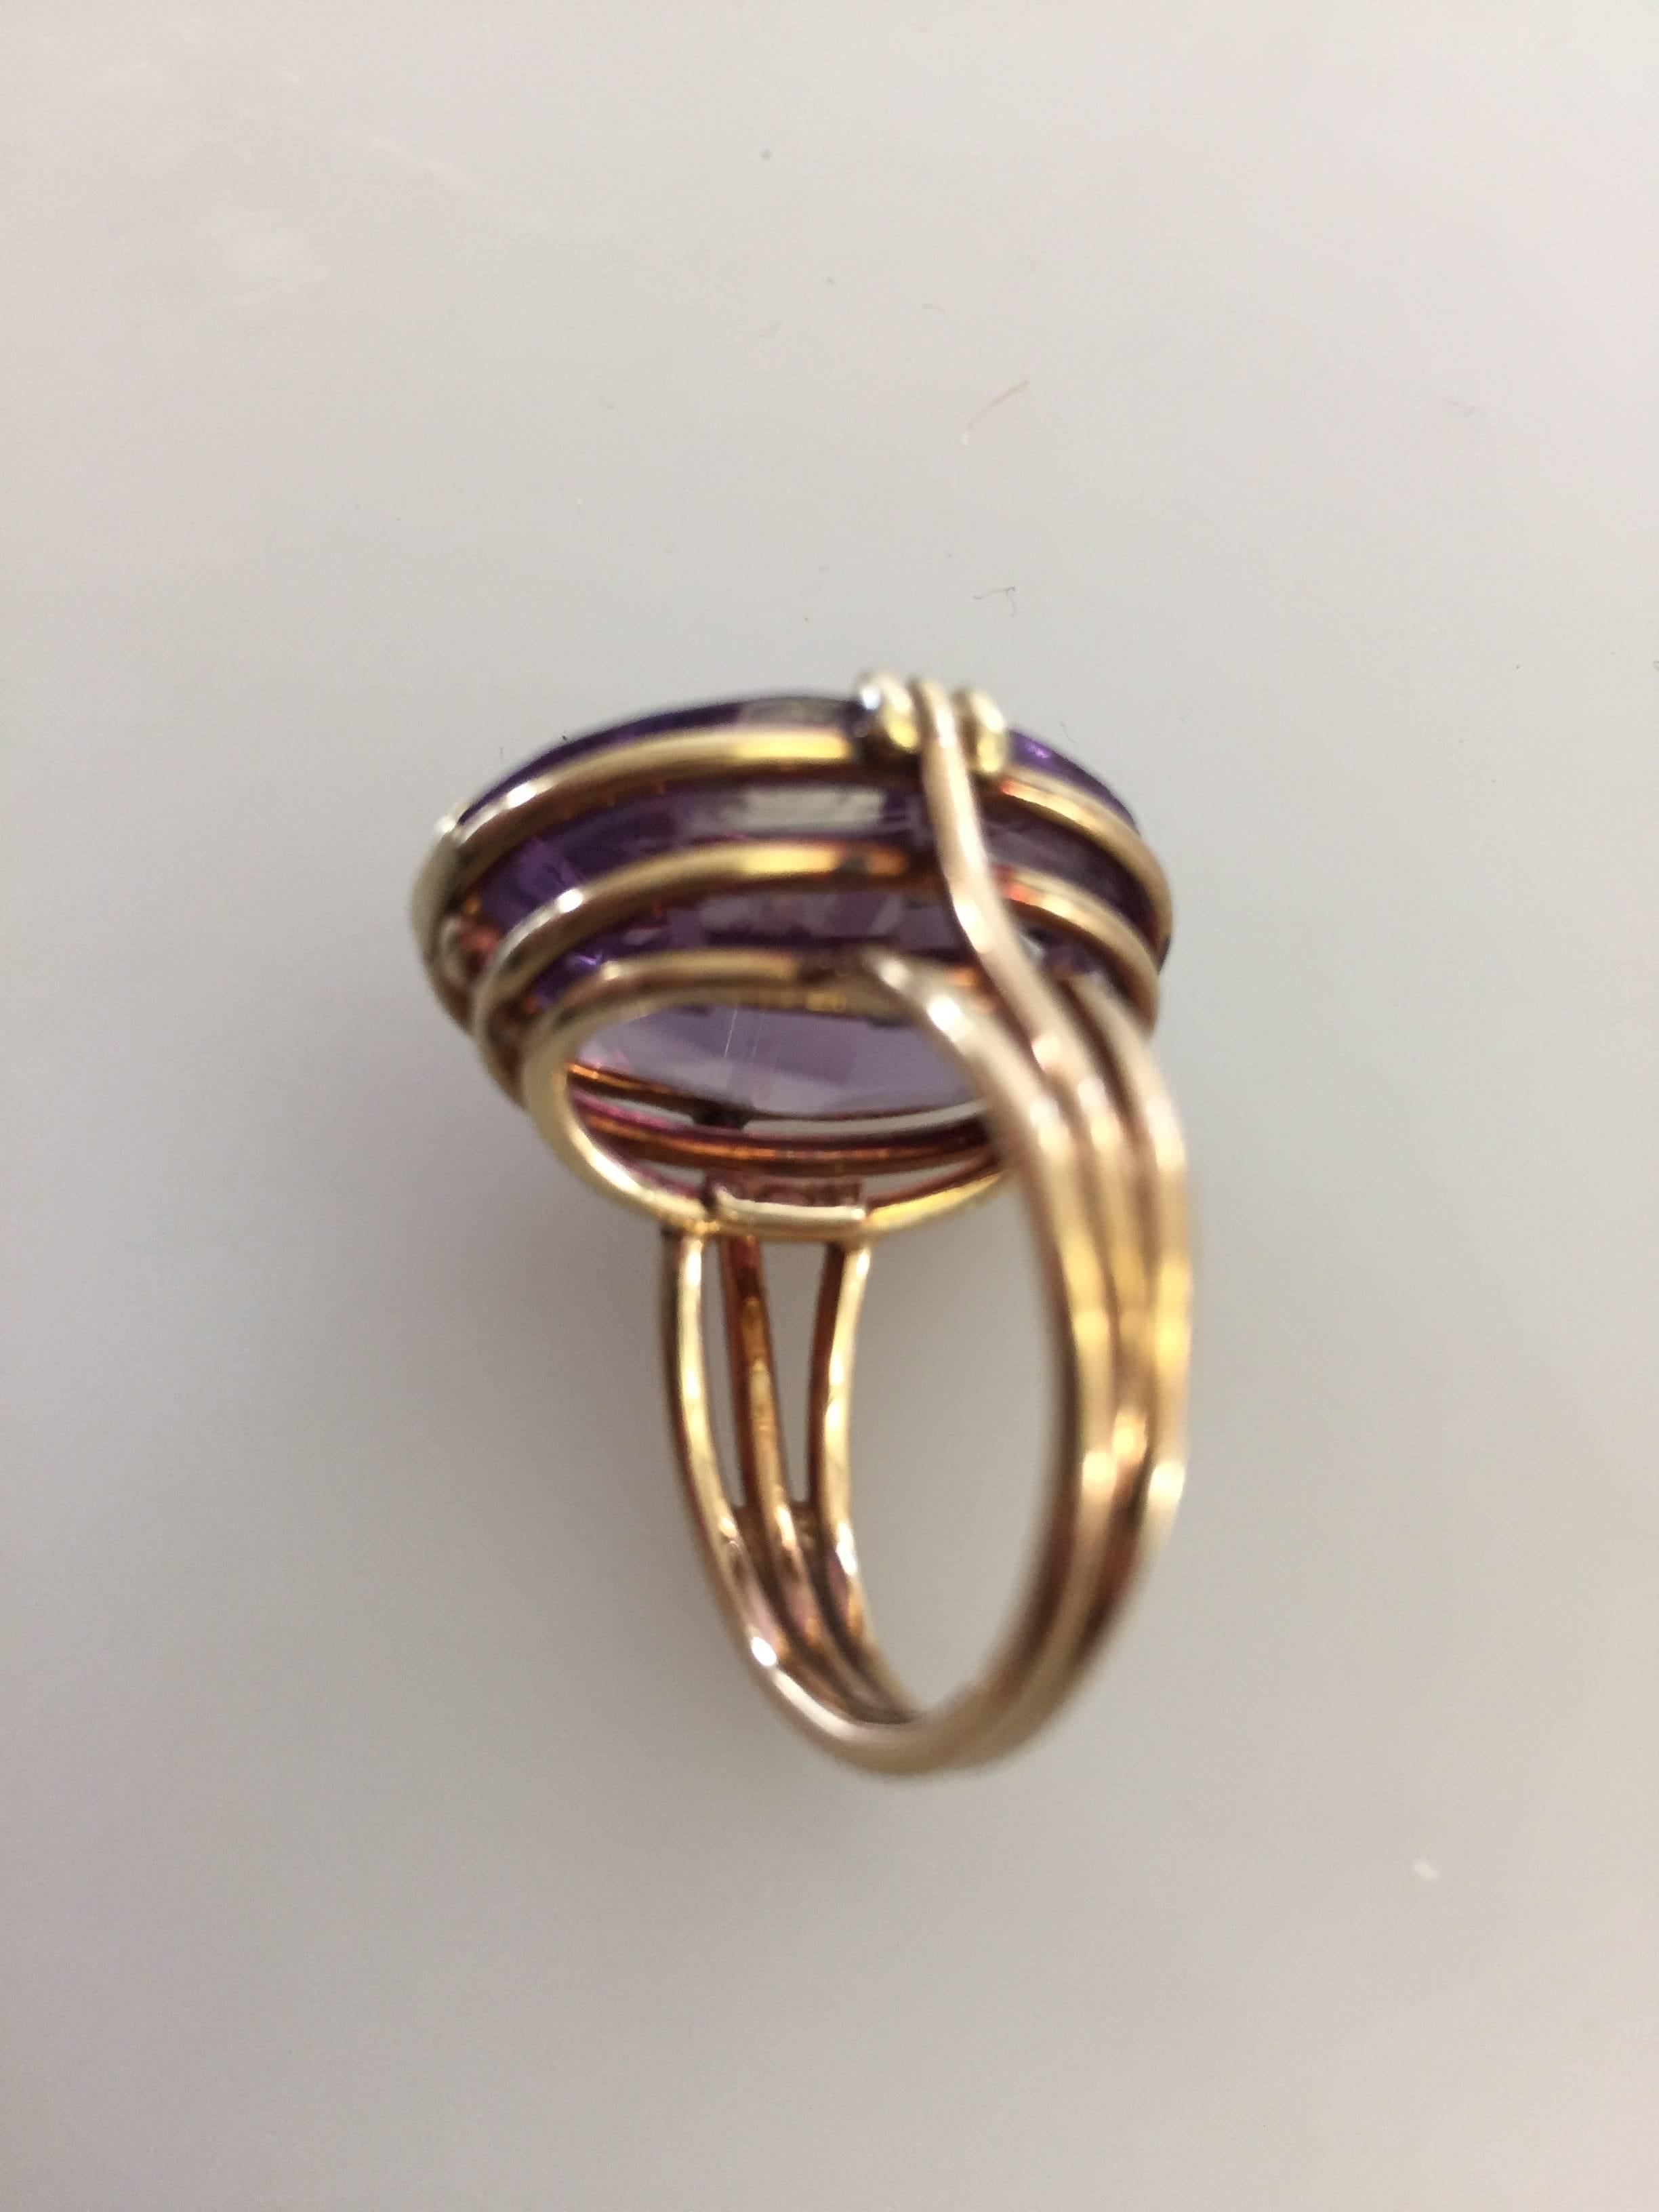 gold ring with amethyst stone